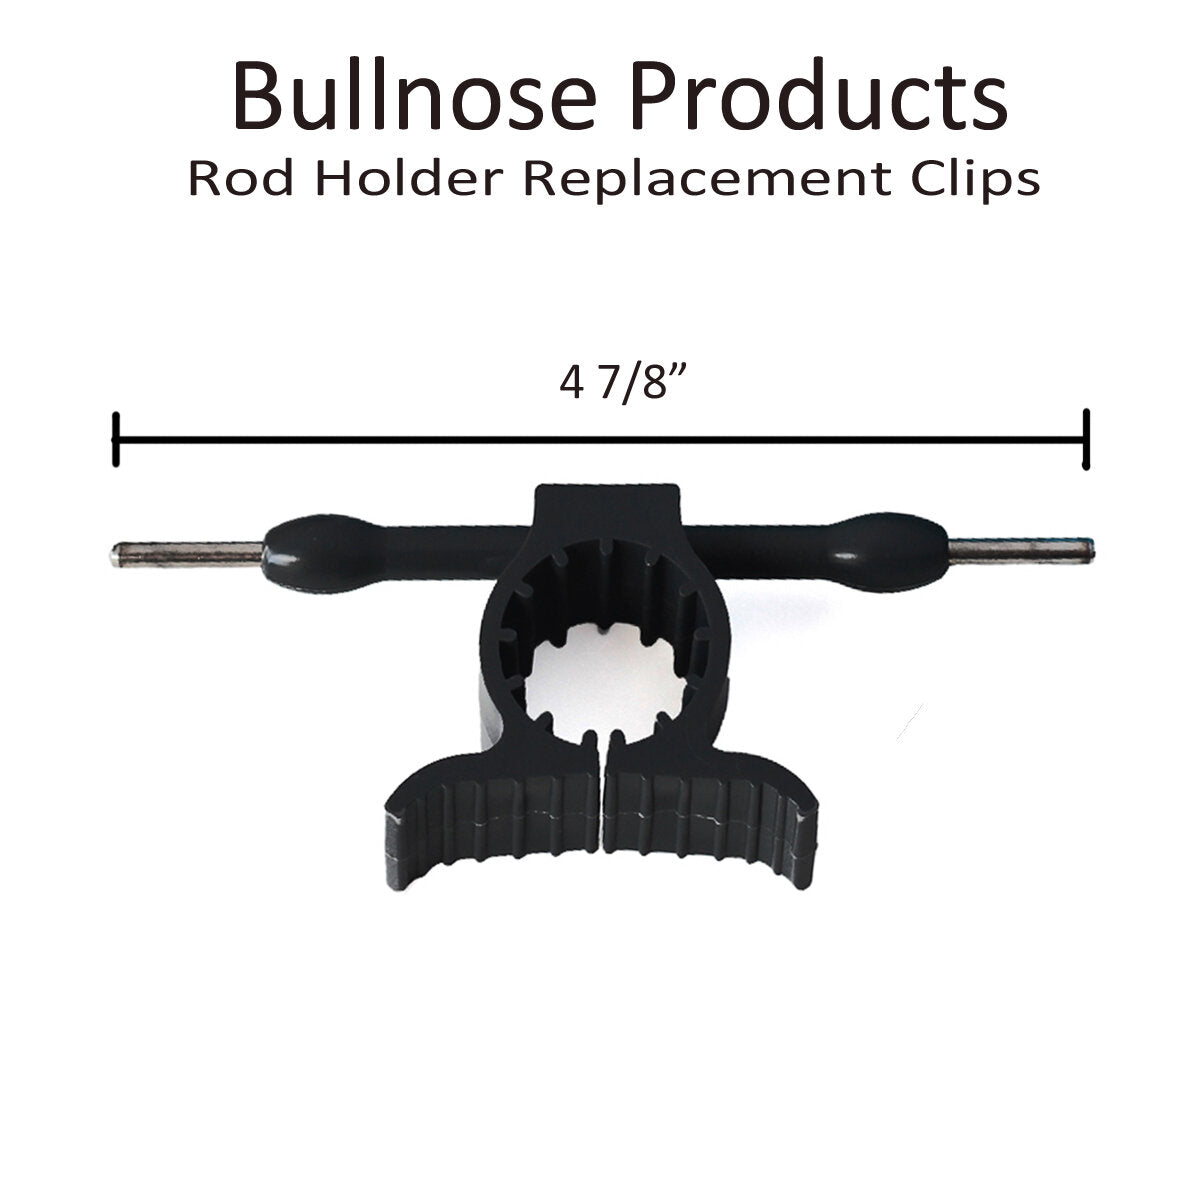 REPLACEMENT CLIPS